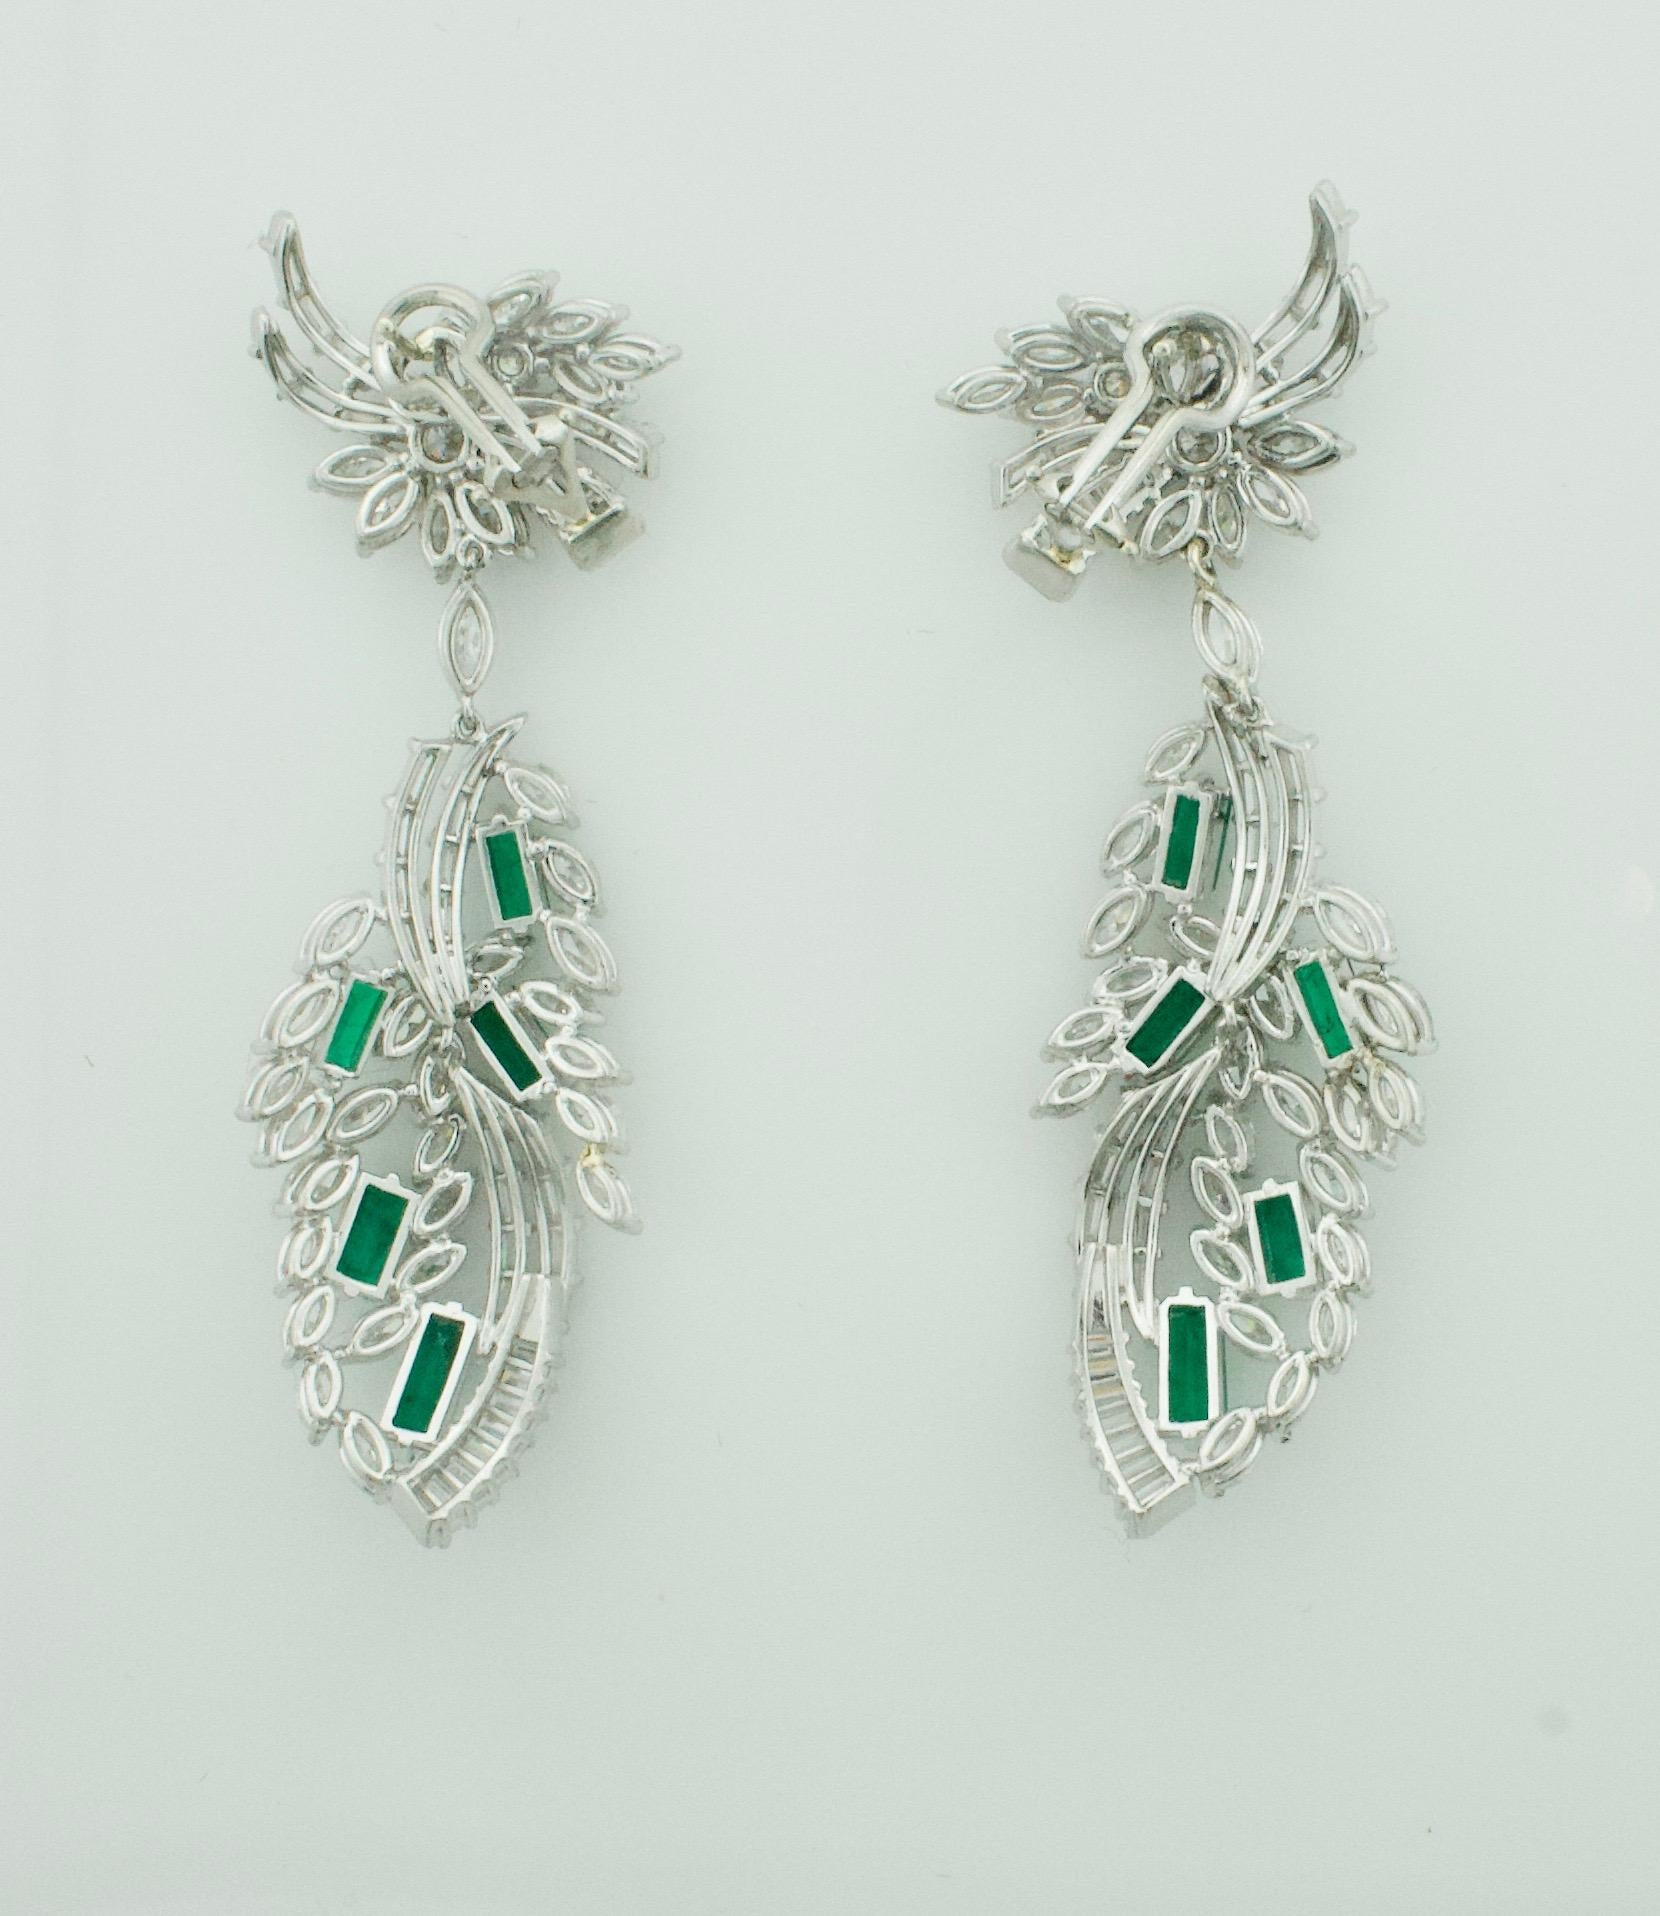 Circa 1950's Dangling Diamond and Emerald Earrings in Platinum In Excellent Condition For Sale In Wailea, HI